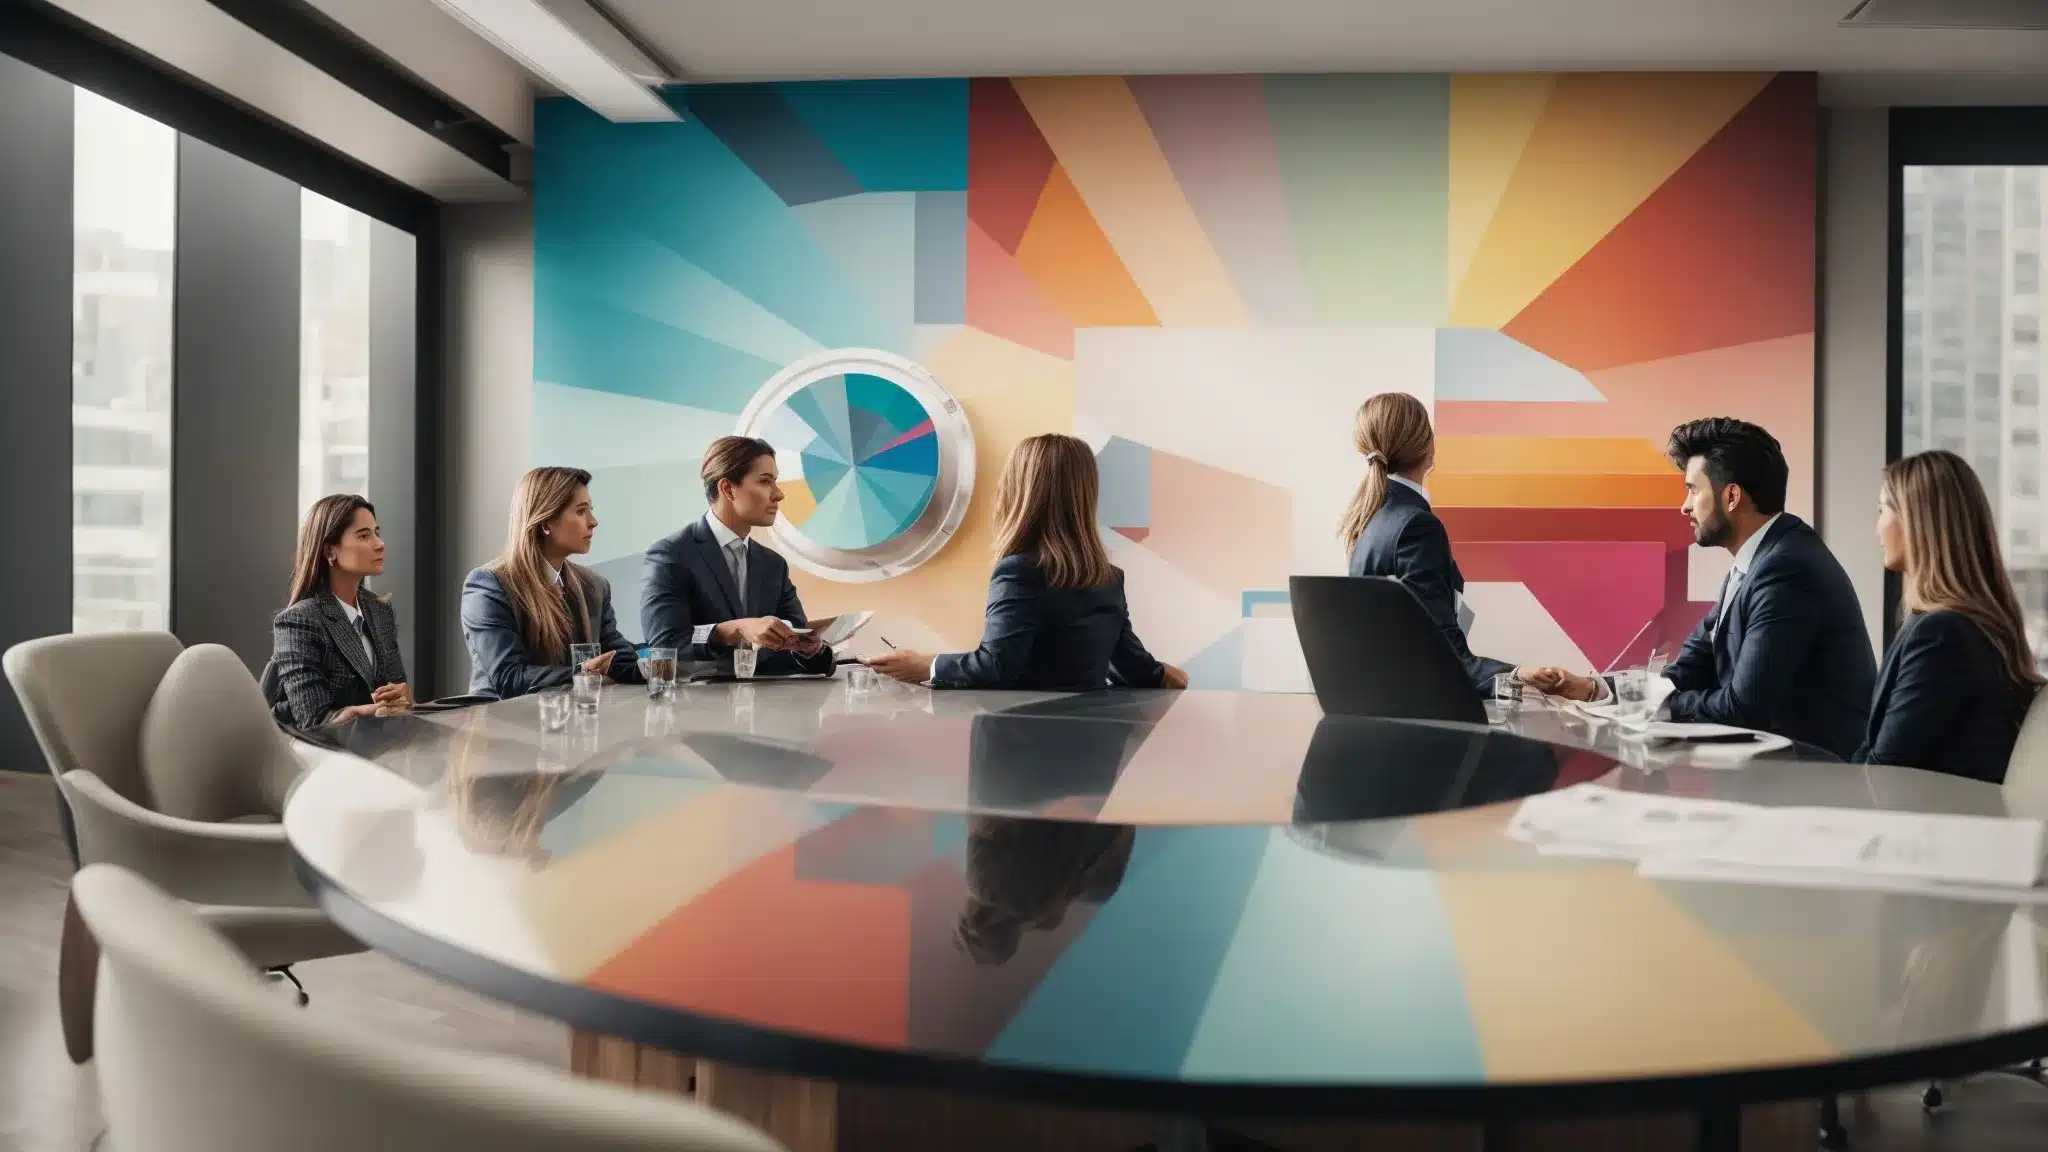 A Marketer Presents A Colorful Pie Chart On Brand Equity To A Group Of Attentive Professionals In A Sleek Conference Room.